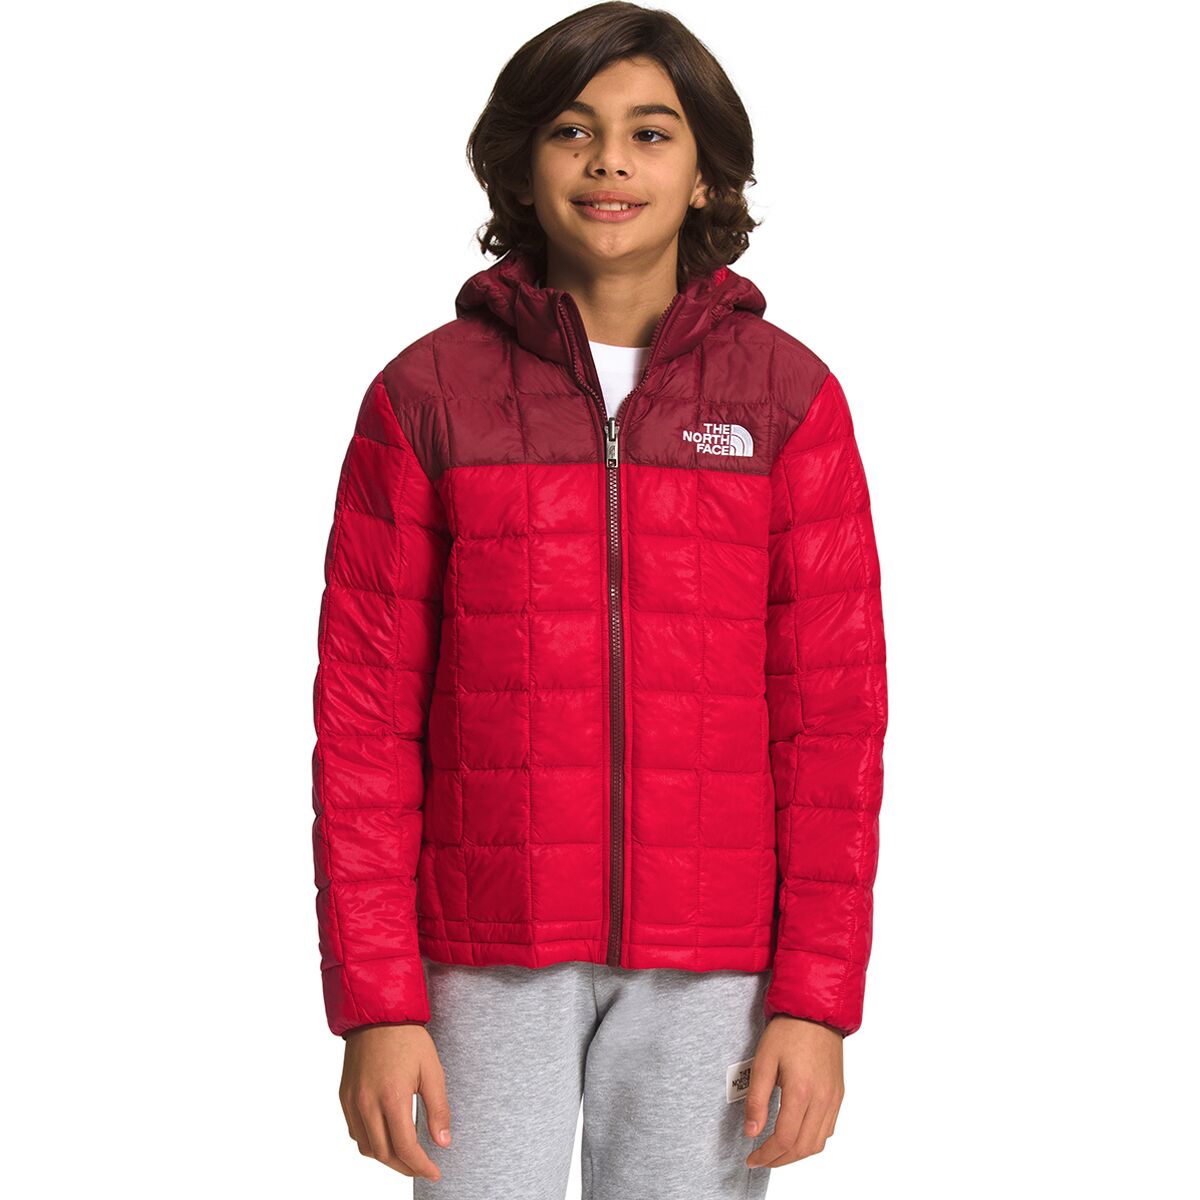 The North Face ThermoBall Eco Hooded Jacket - Boys'